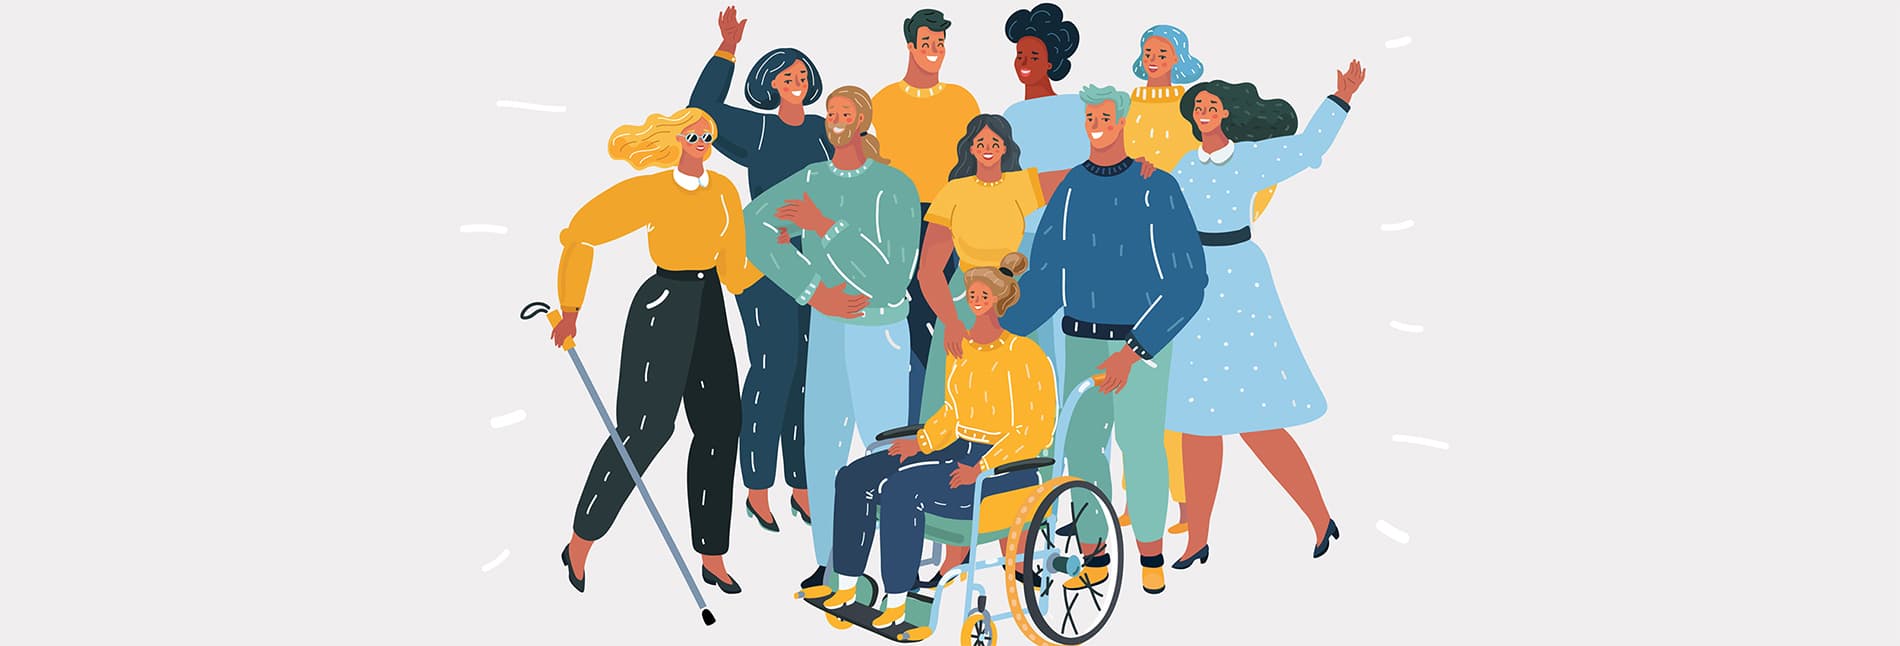 Illustration of diverse group of people, including some with disabilities